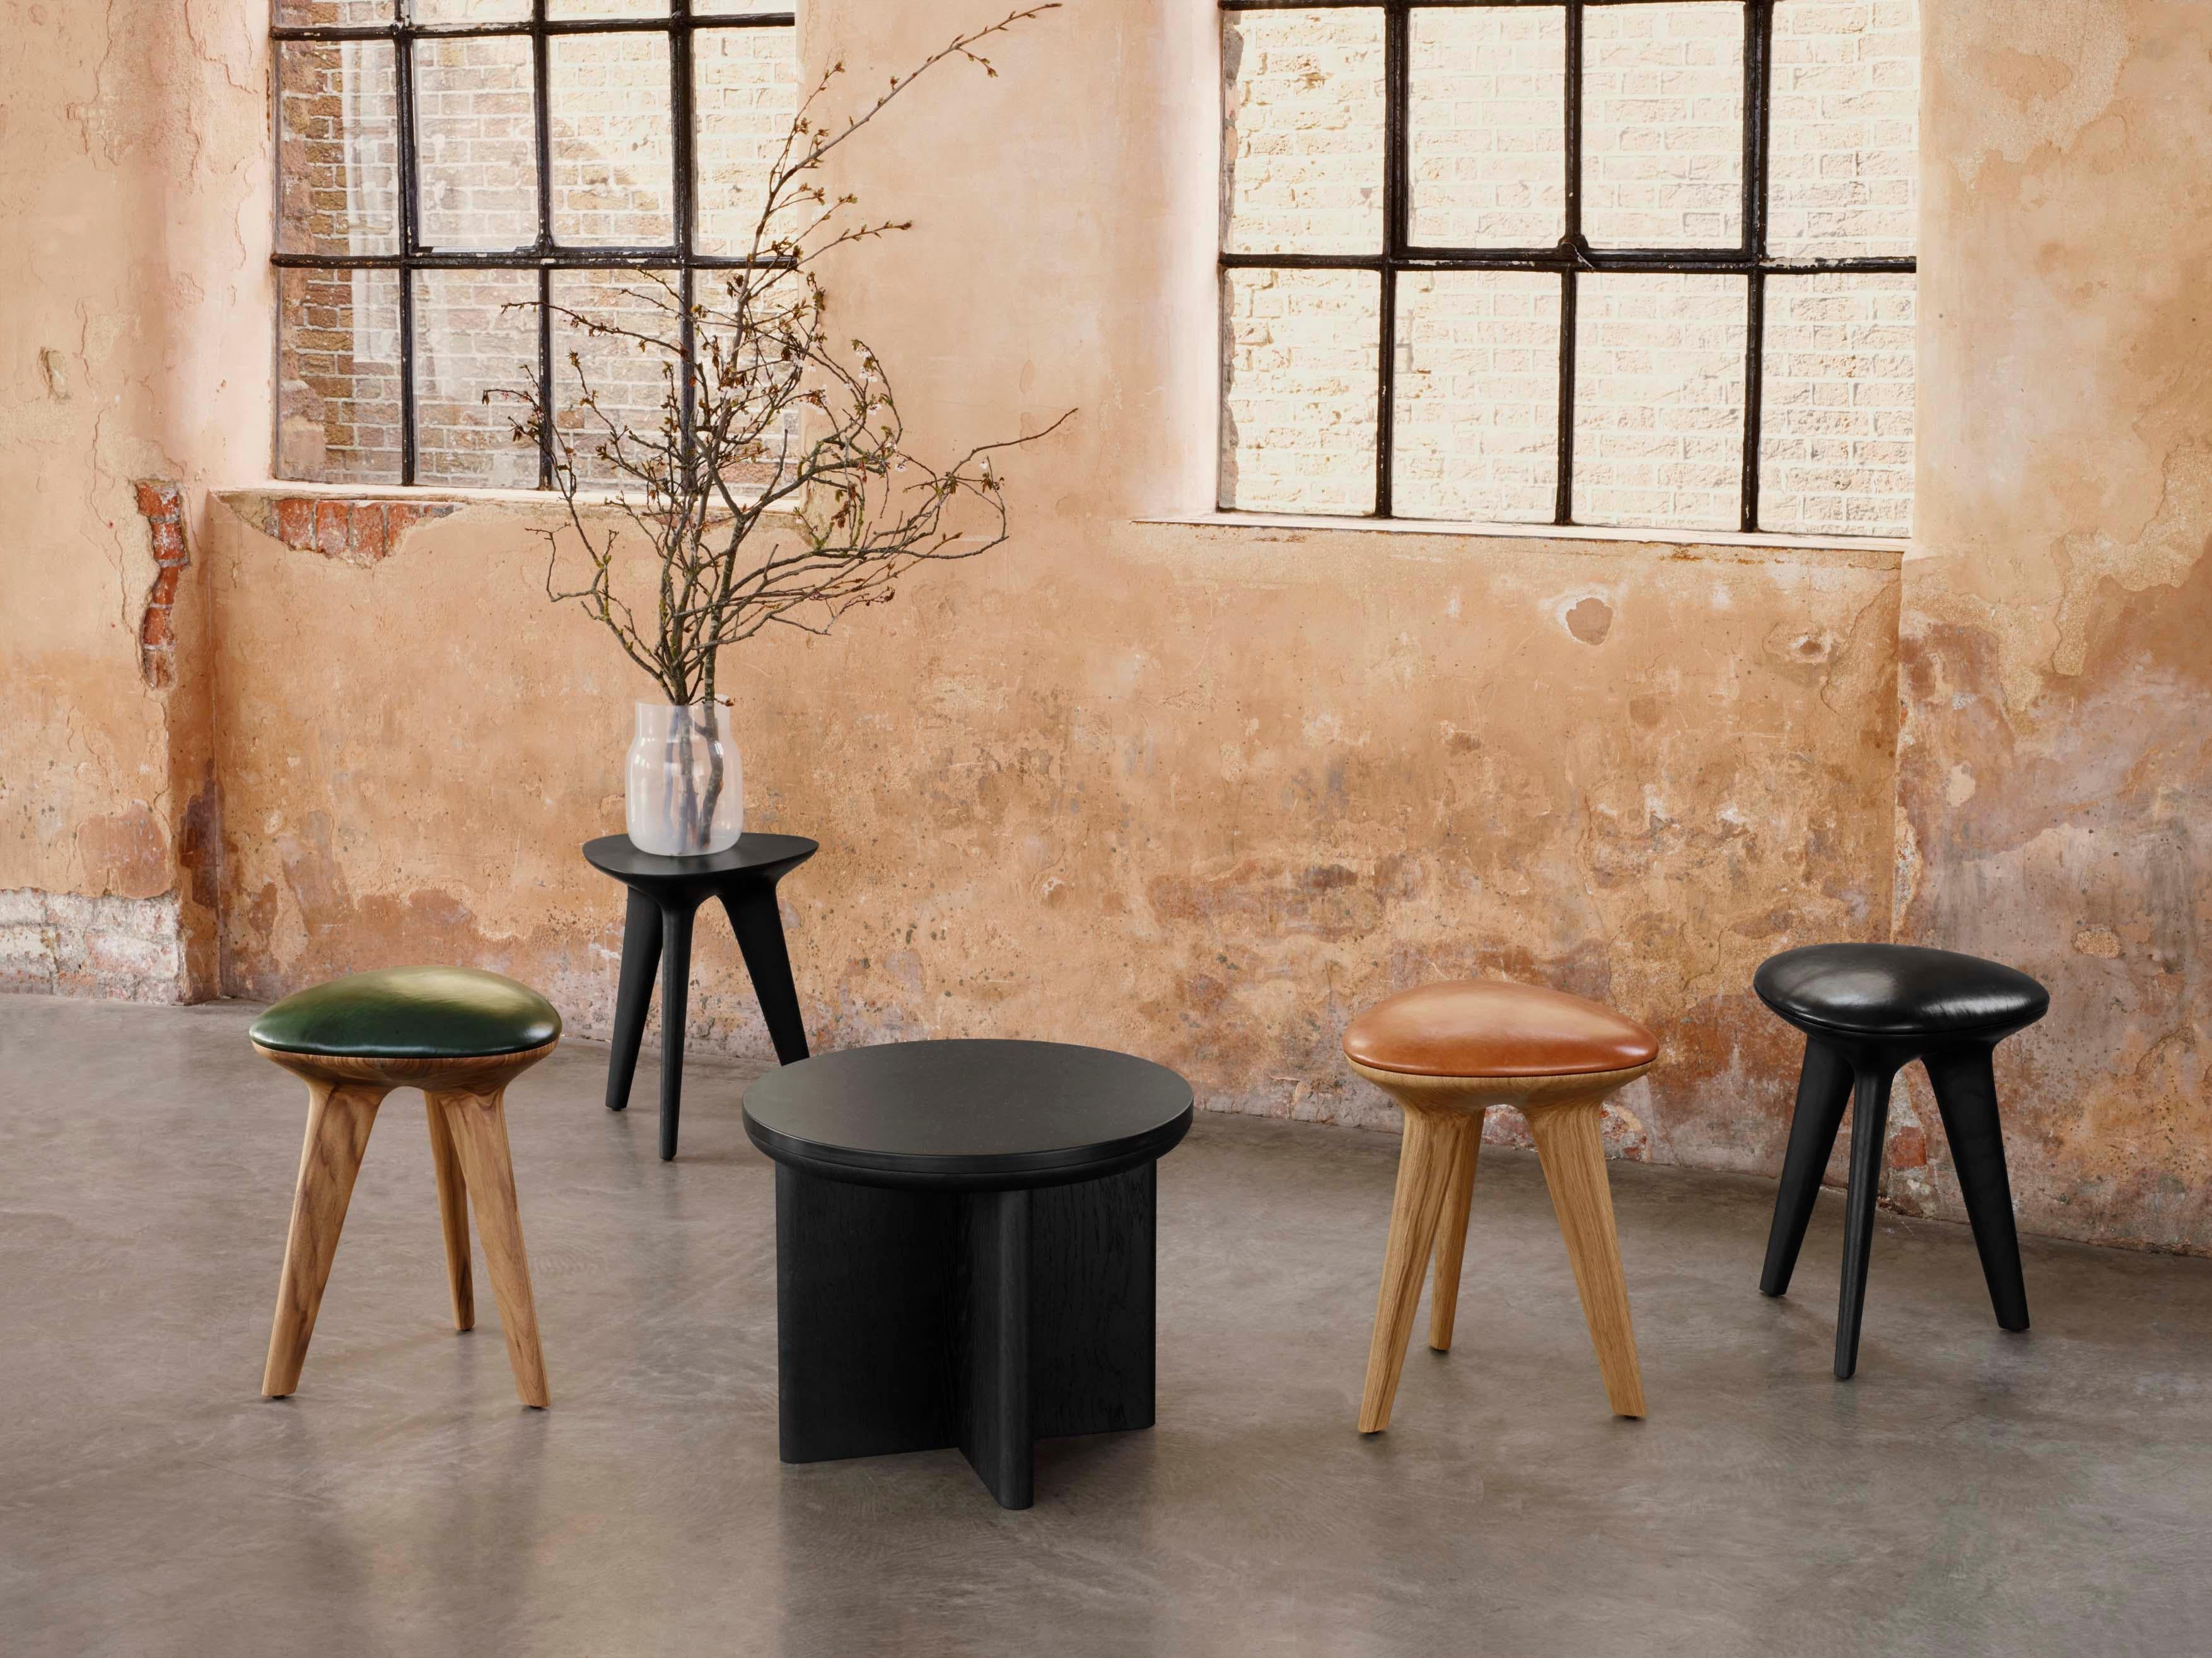 Inspired by the Reuleaux rotating triangle, the form of the Rotor stool is based on the intersection of three circles. The CNC-cut organic shape celebrates ‘the curve of constant width'. Available as a comfortable stool in oak or ebonised oak with